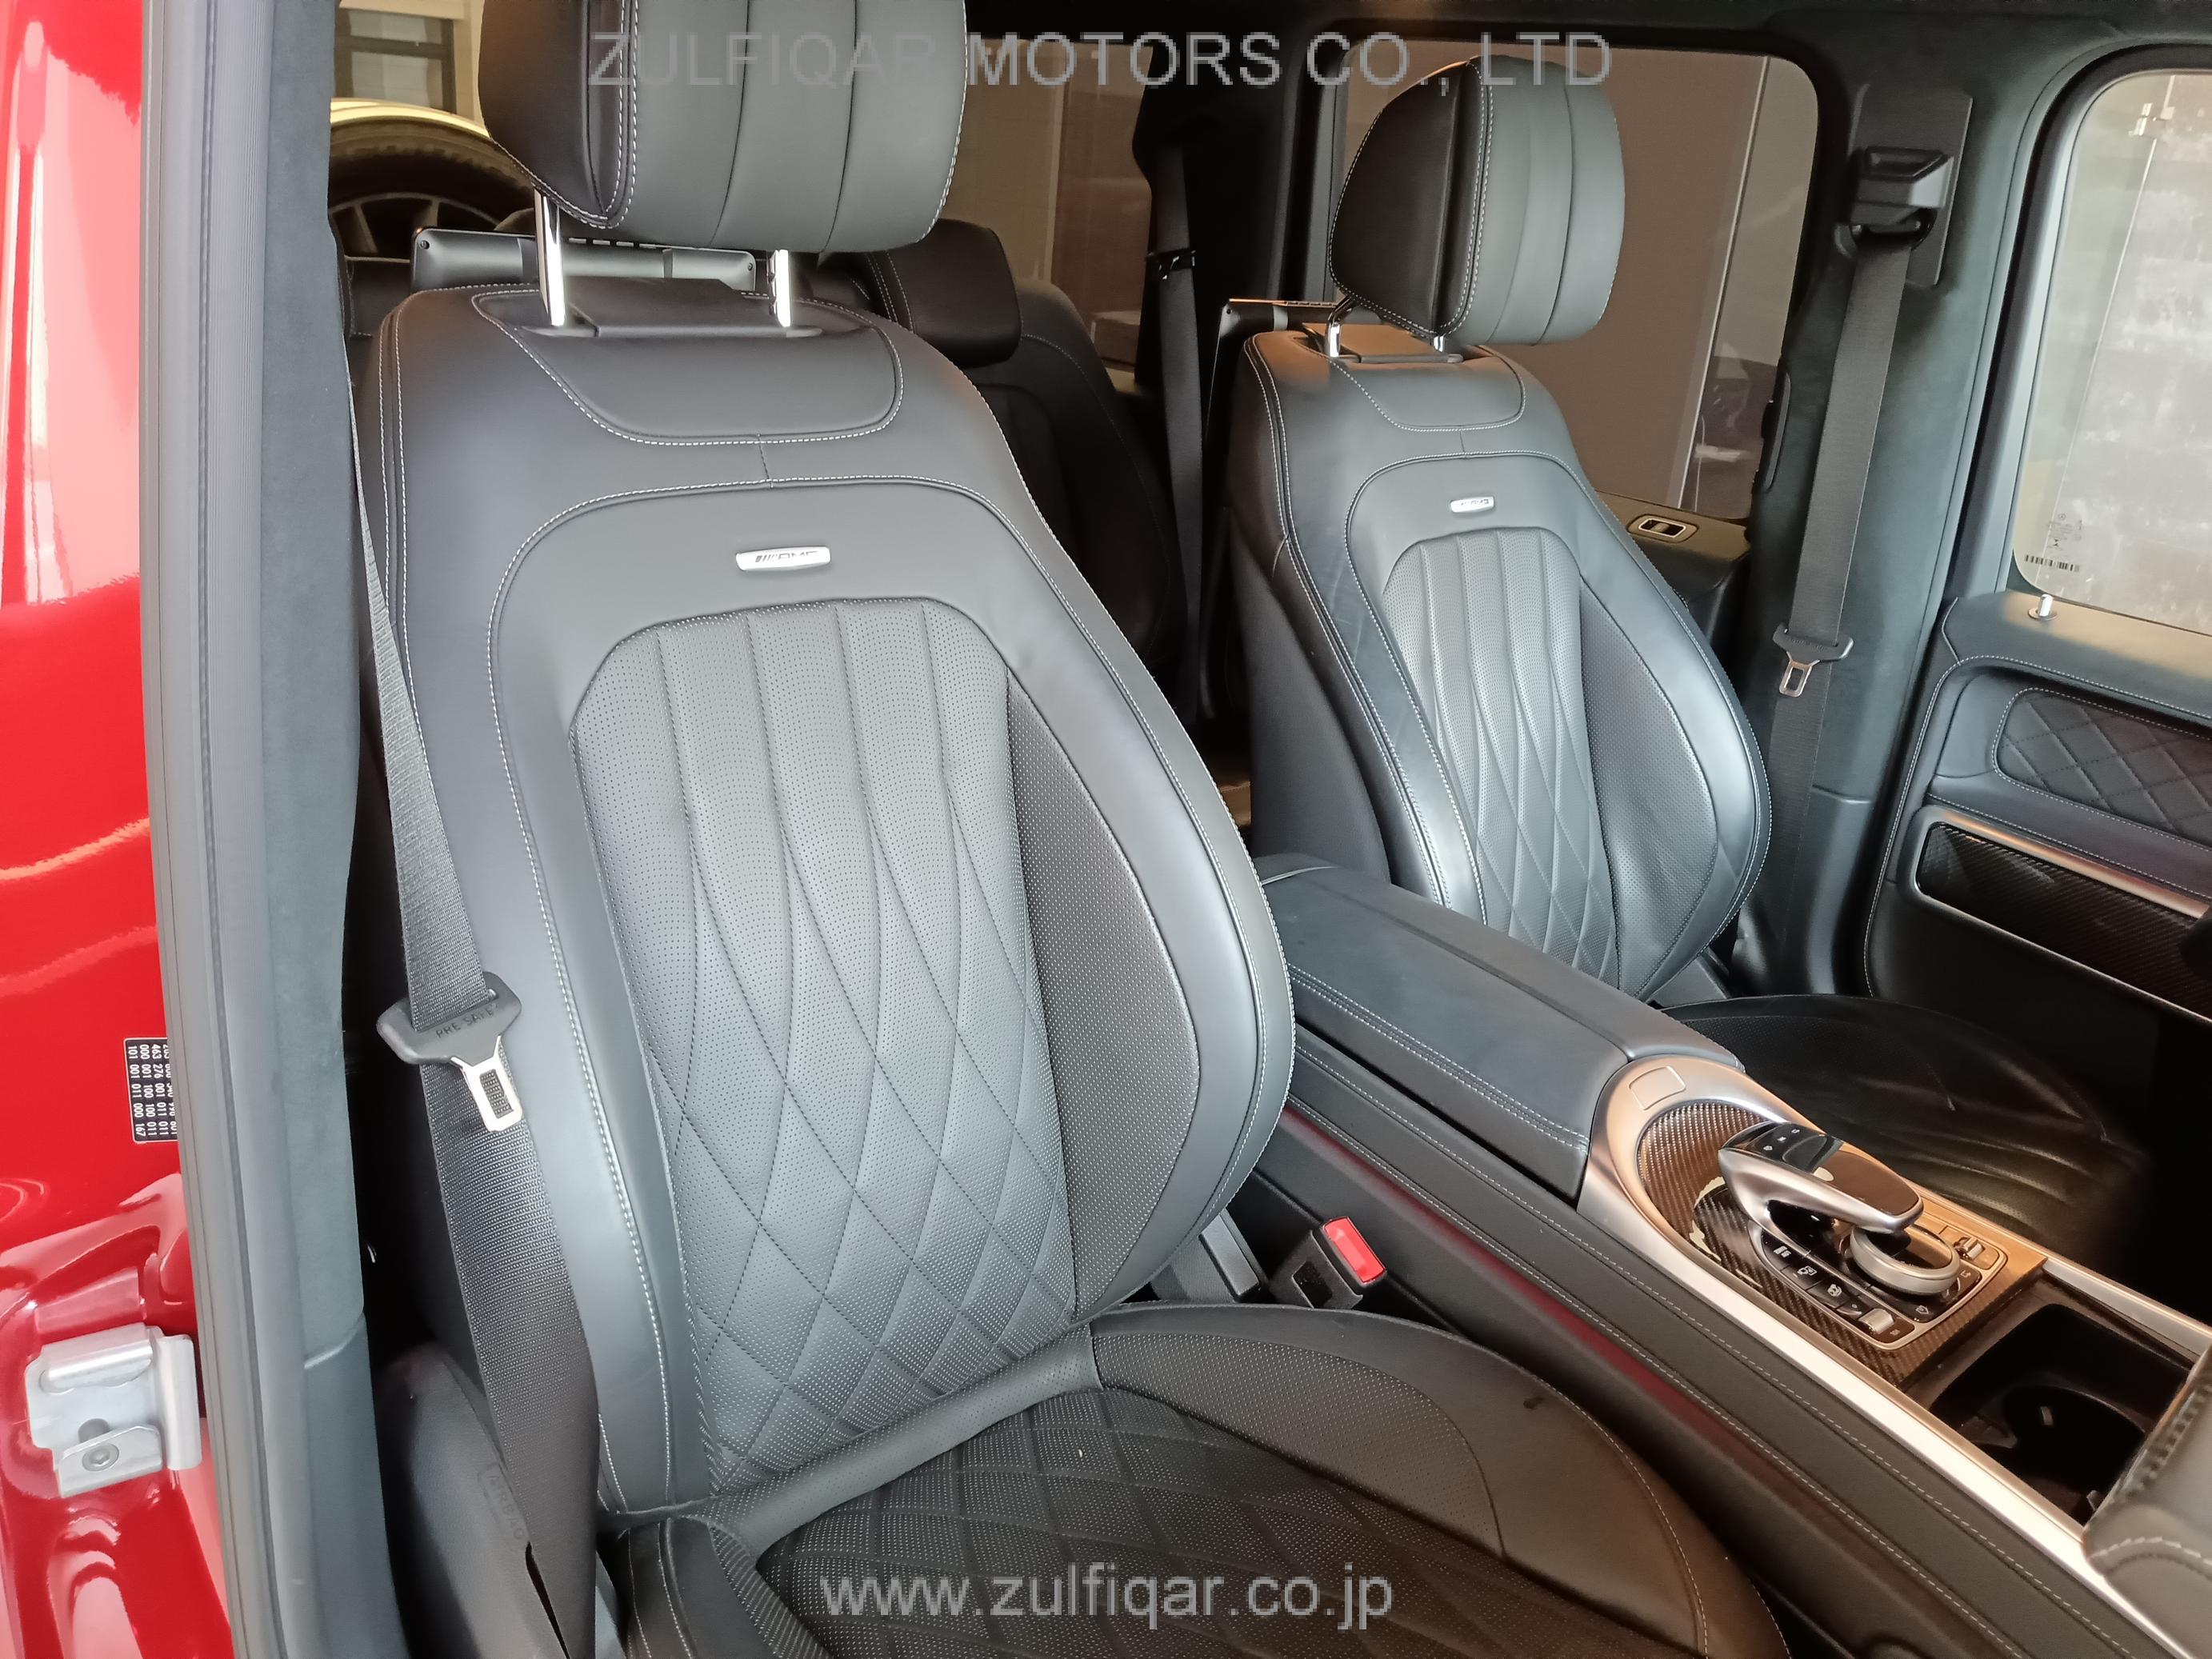 MERCEDES AMG G CLASS 2019 Image 62